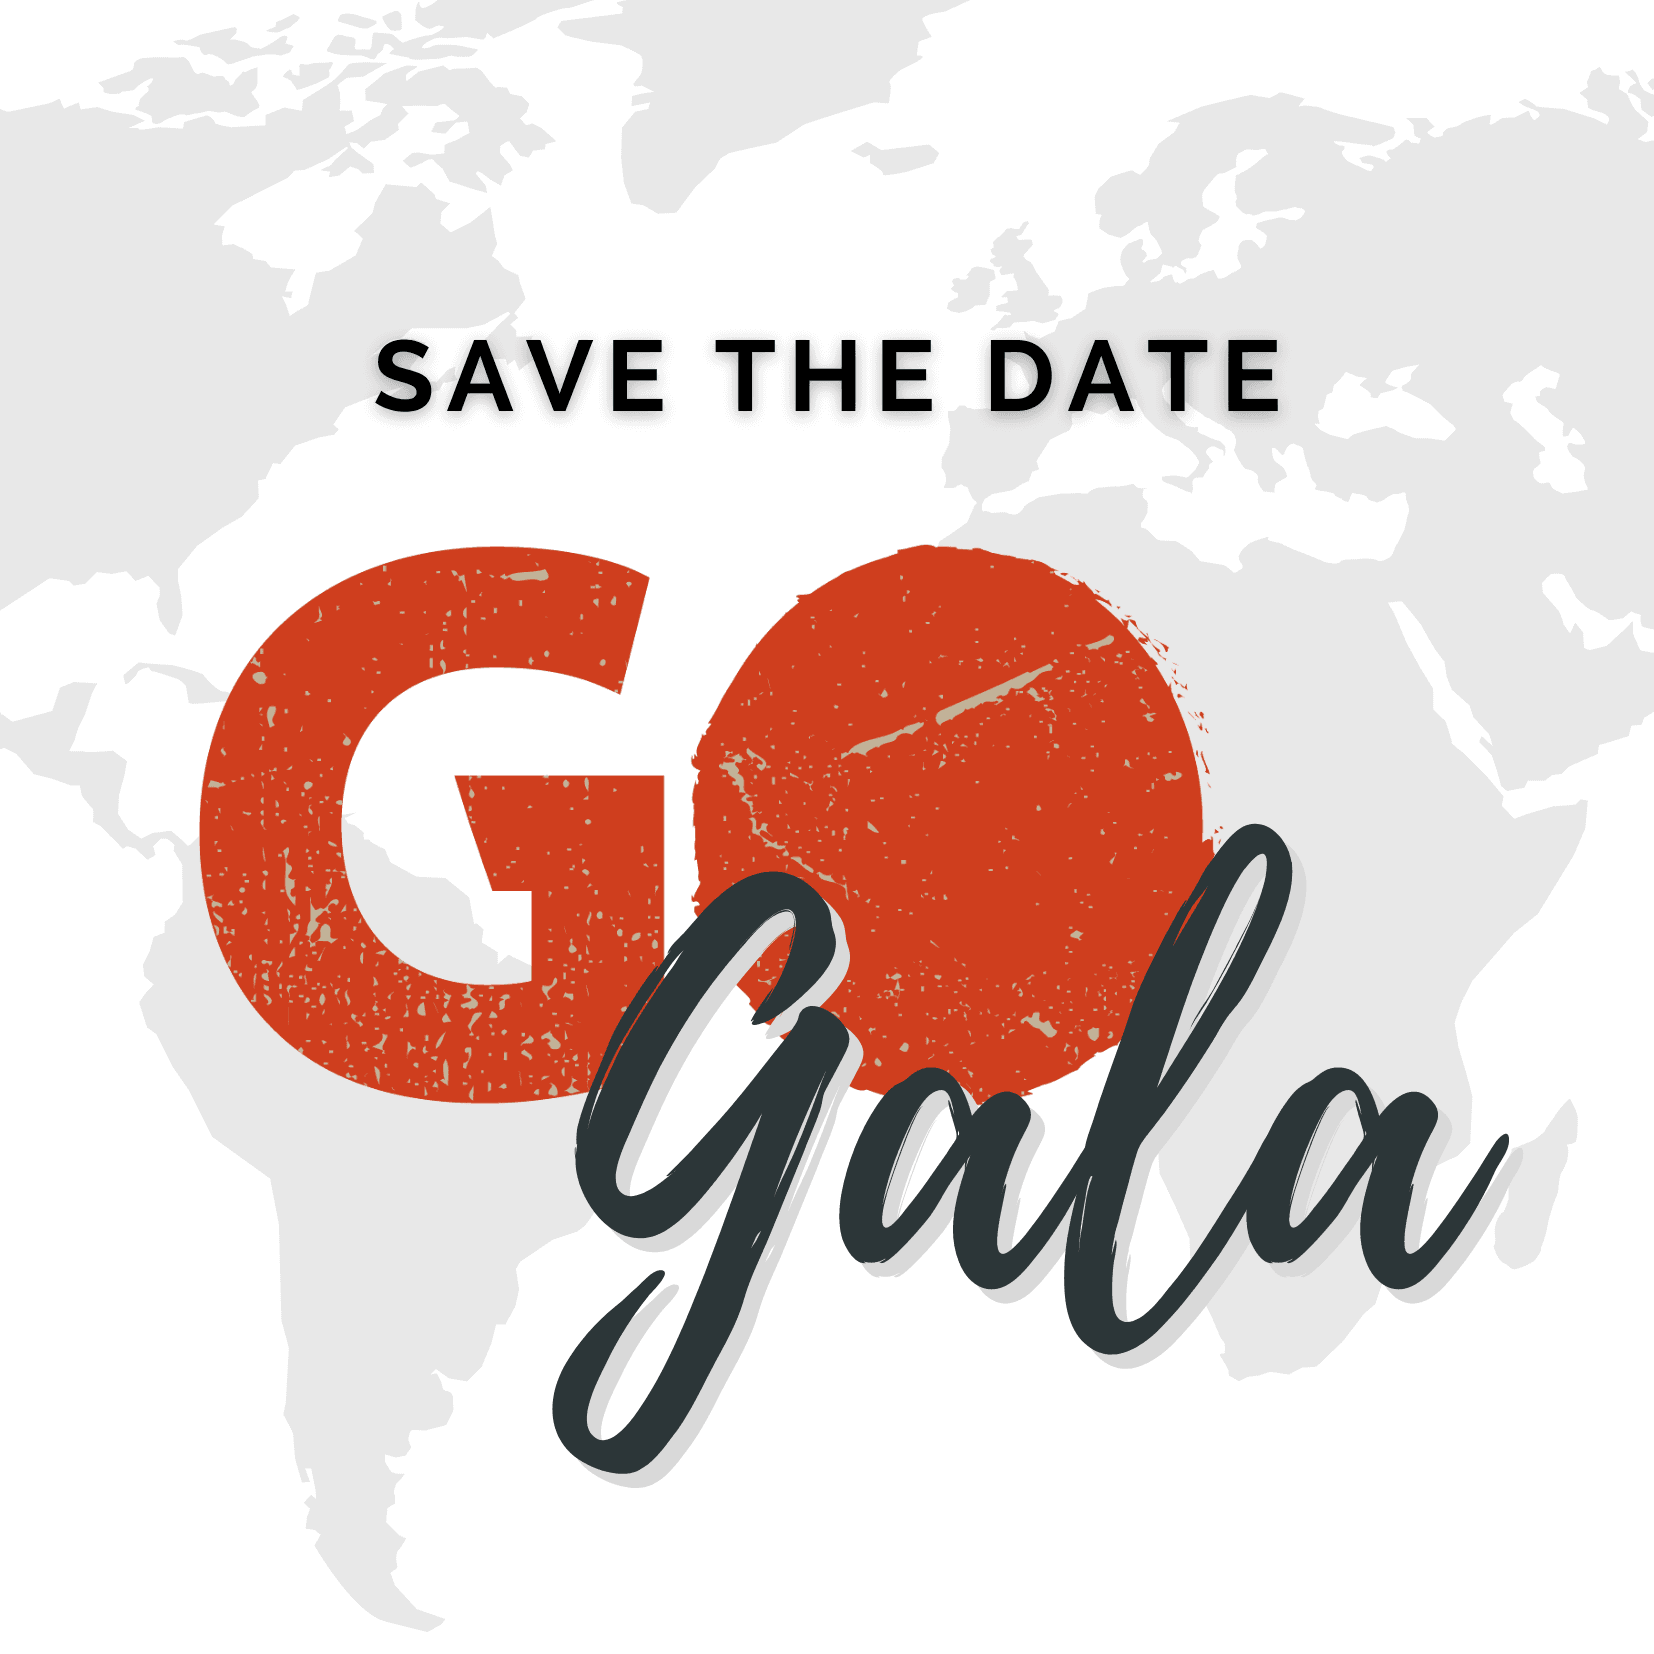 Join us at the GO Gala on October 8th!